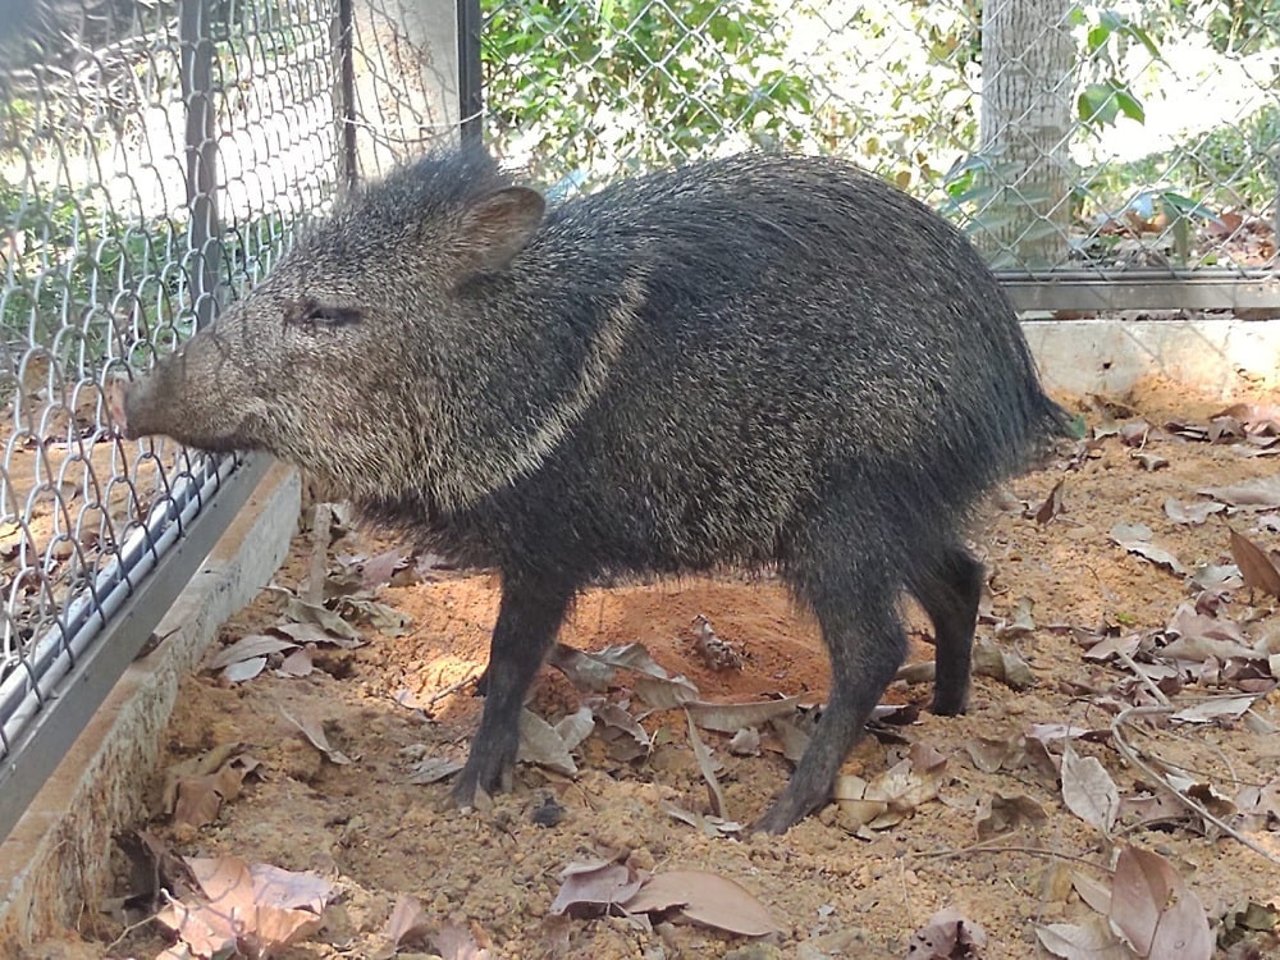 Baby the peccary. Credit: Wild animals care / UFMT SINOP